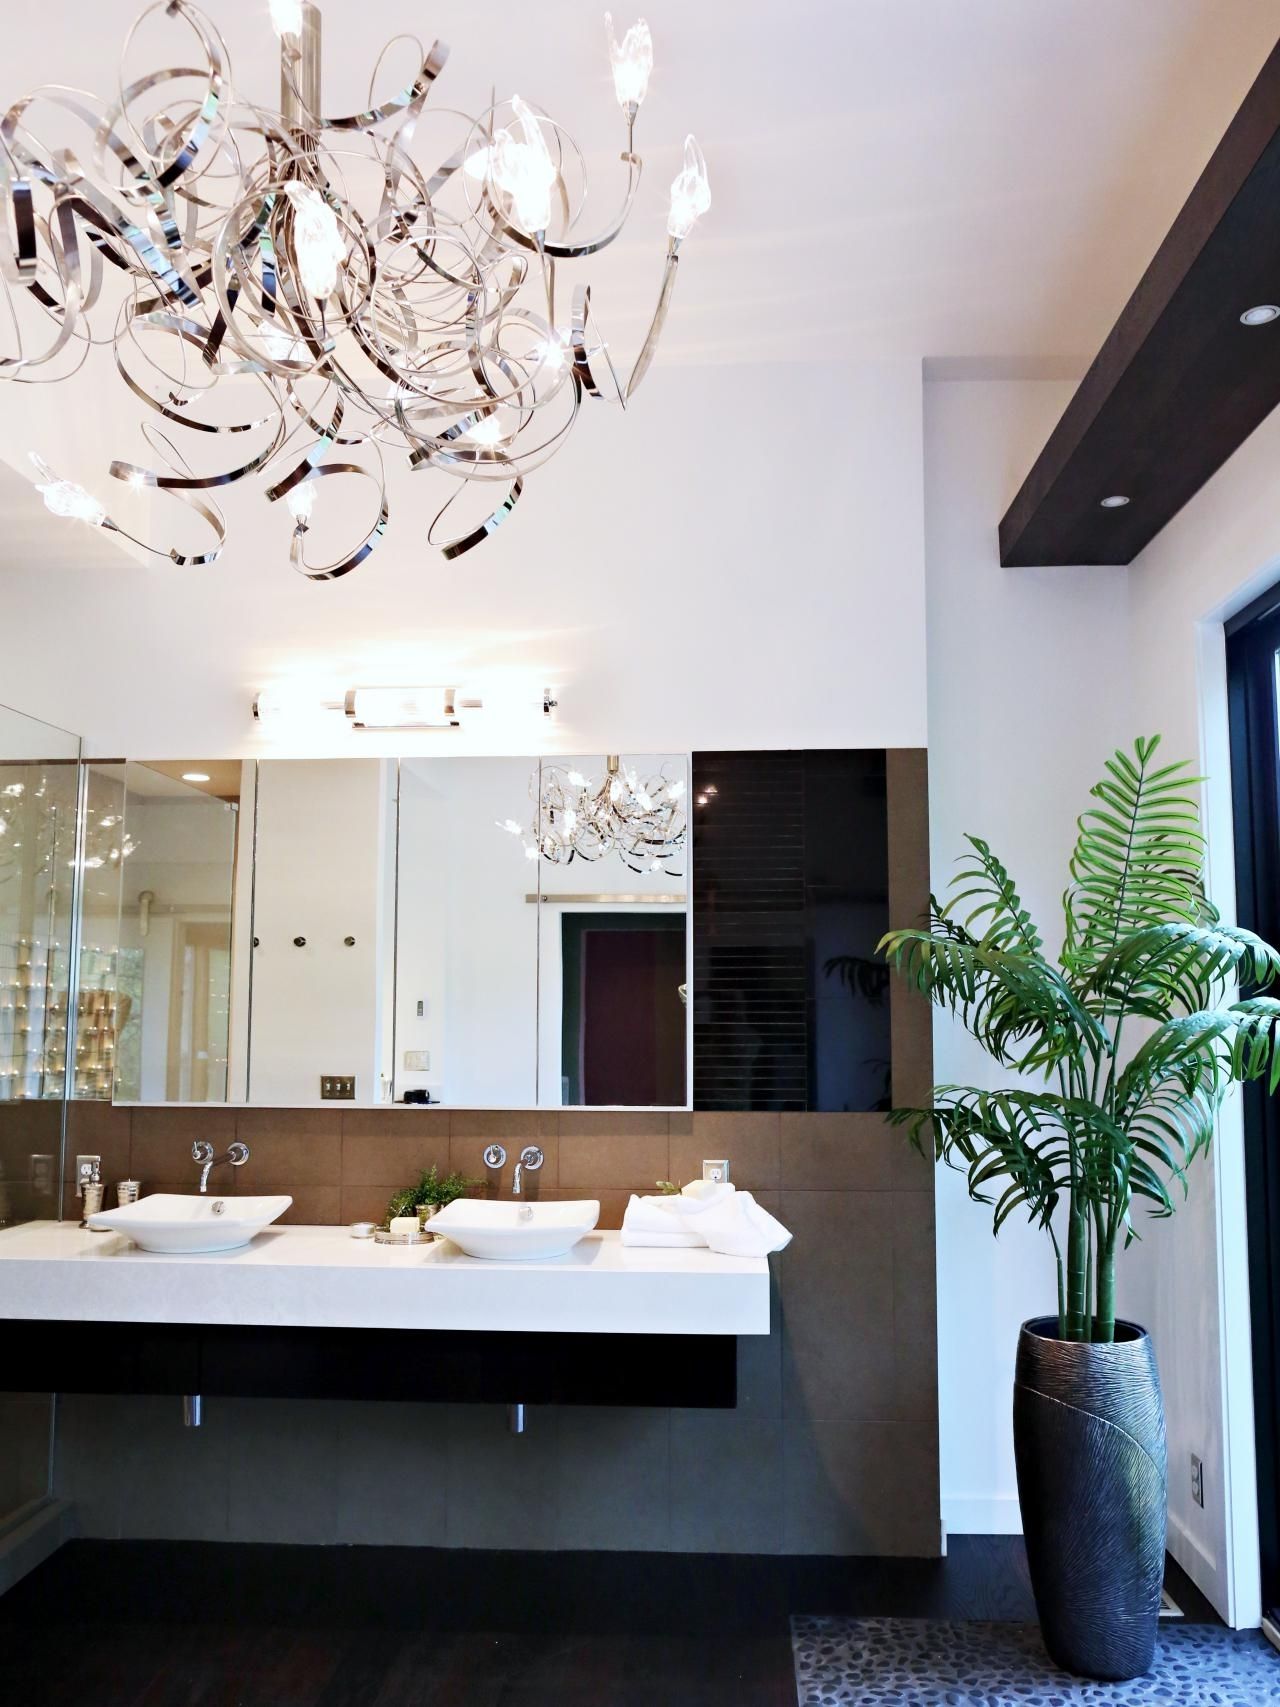 Widely Used Bathroom Ideas: Bathroom Chandeliers With Dark Wooden Pattern Floor Intended For Modern Bathroom Chandeliers (View 1 of 20)